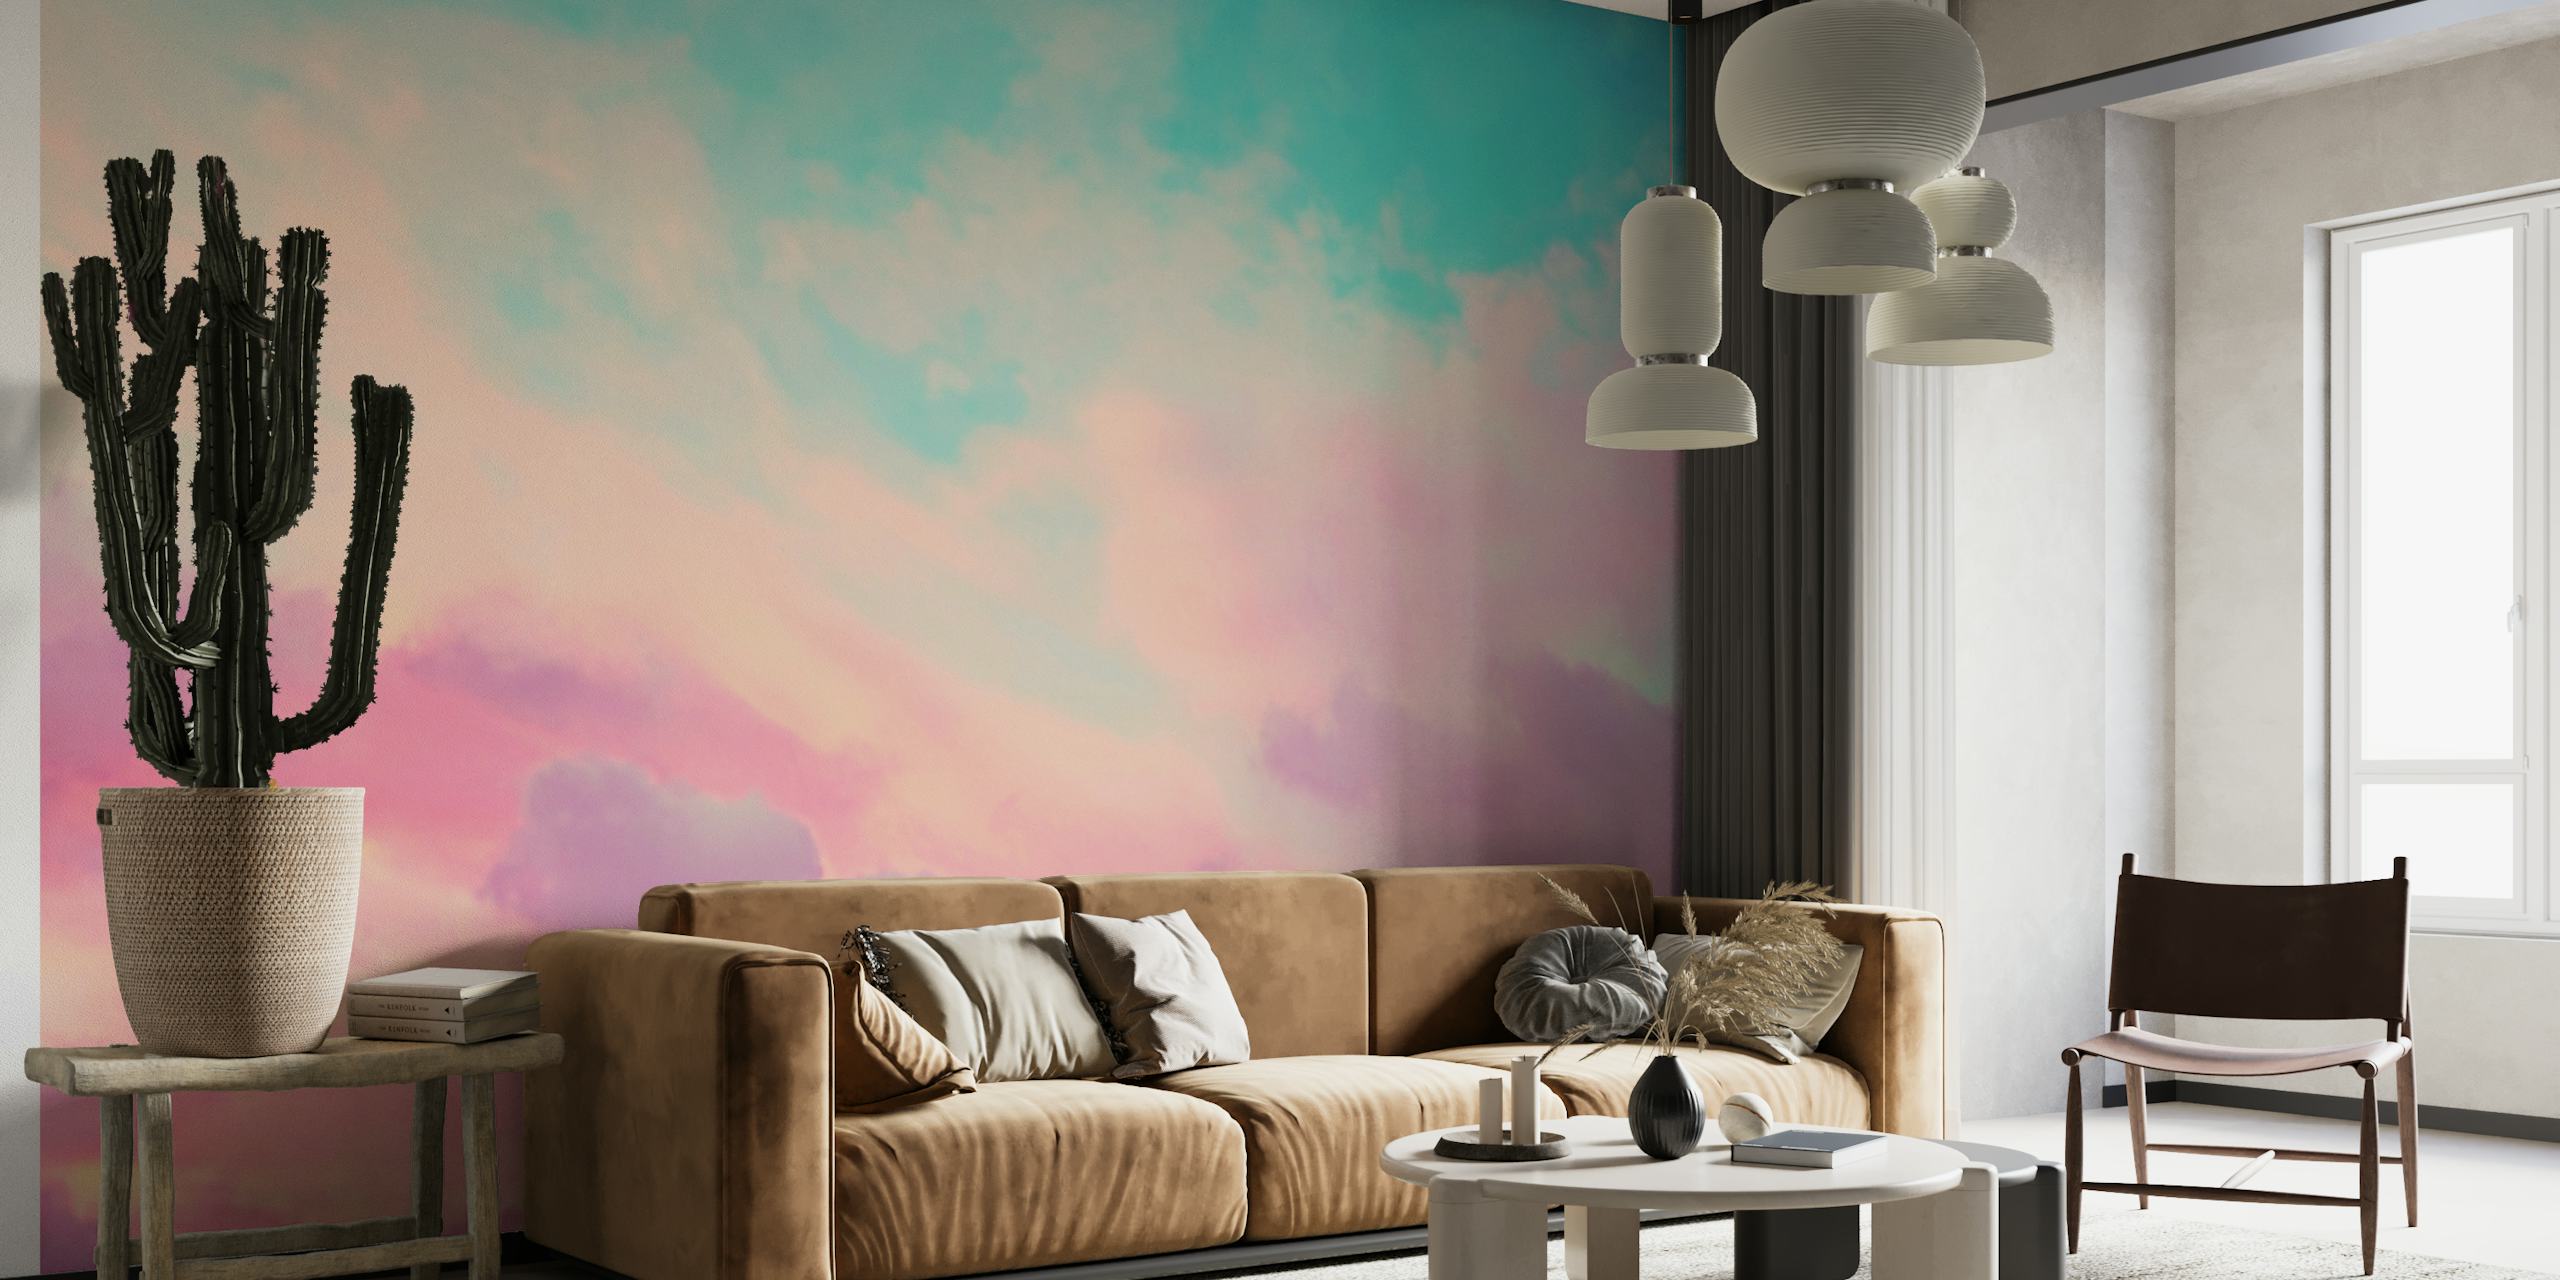 Pastel sky wall mural with soft blues and pinks resembling a serene dusk